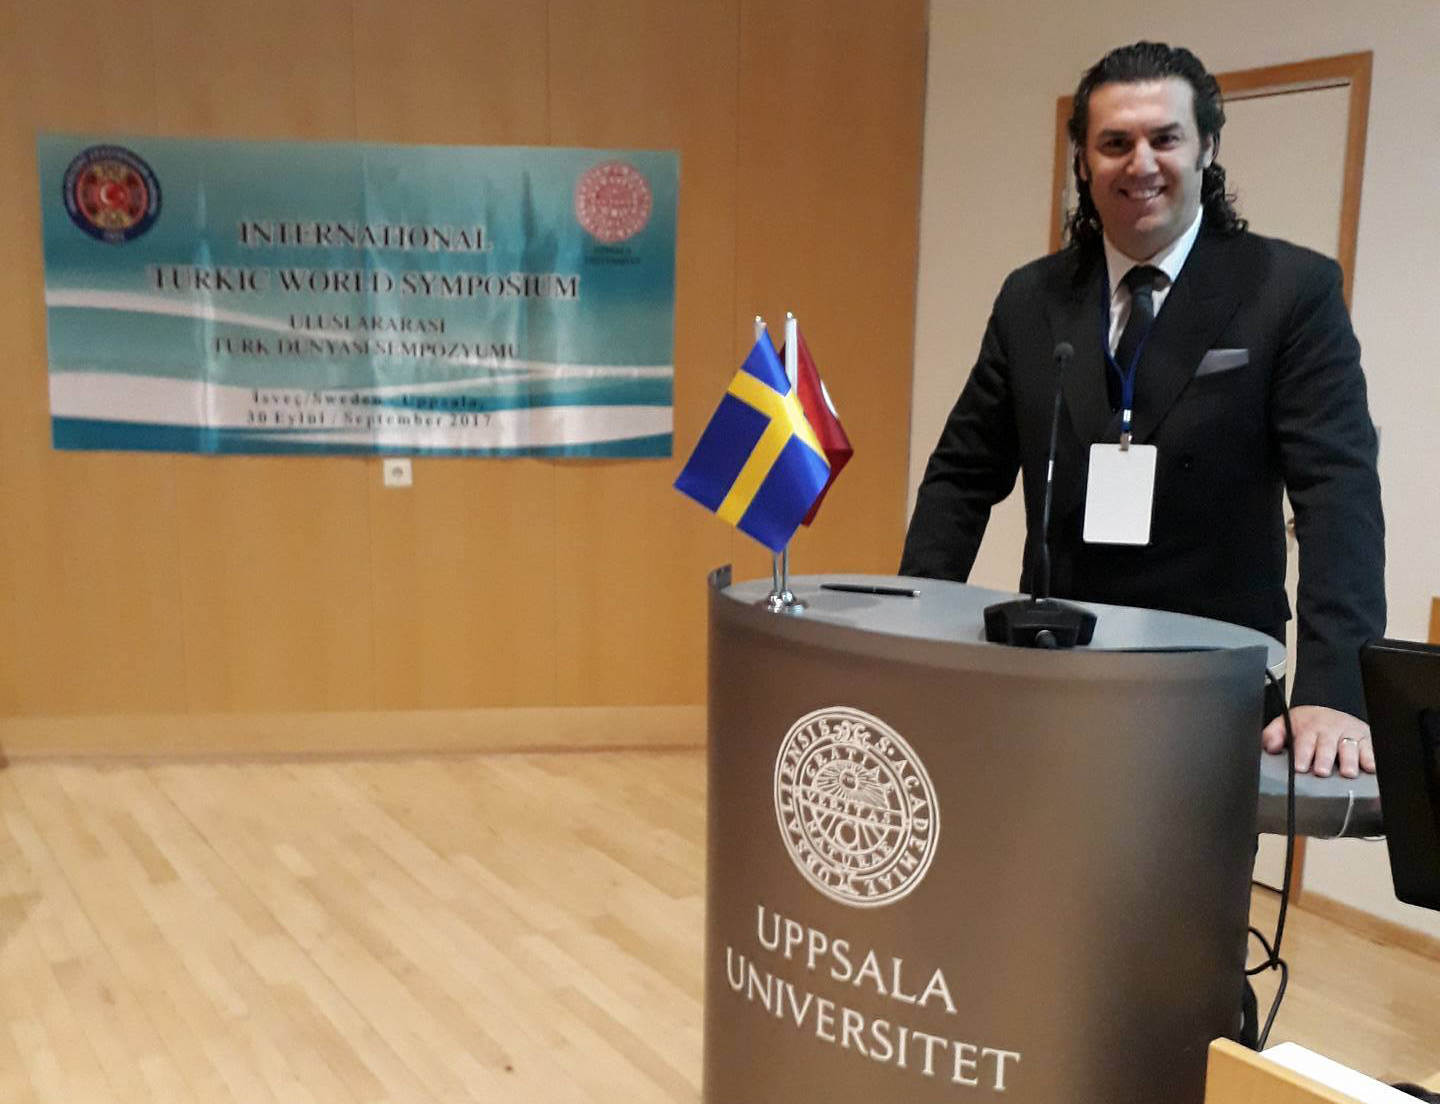 The presentation by Near East University Cyprus Research Centre receives a lot of interest in Sweden